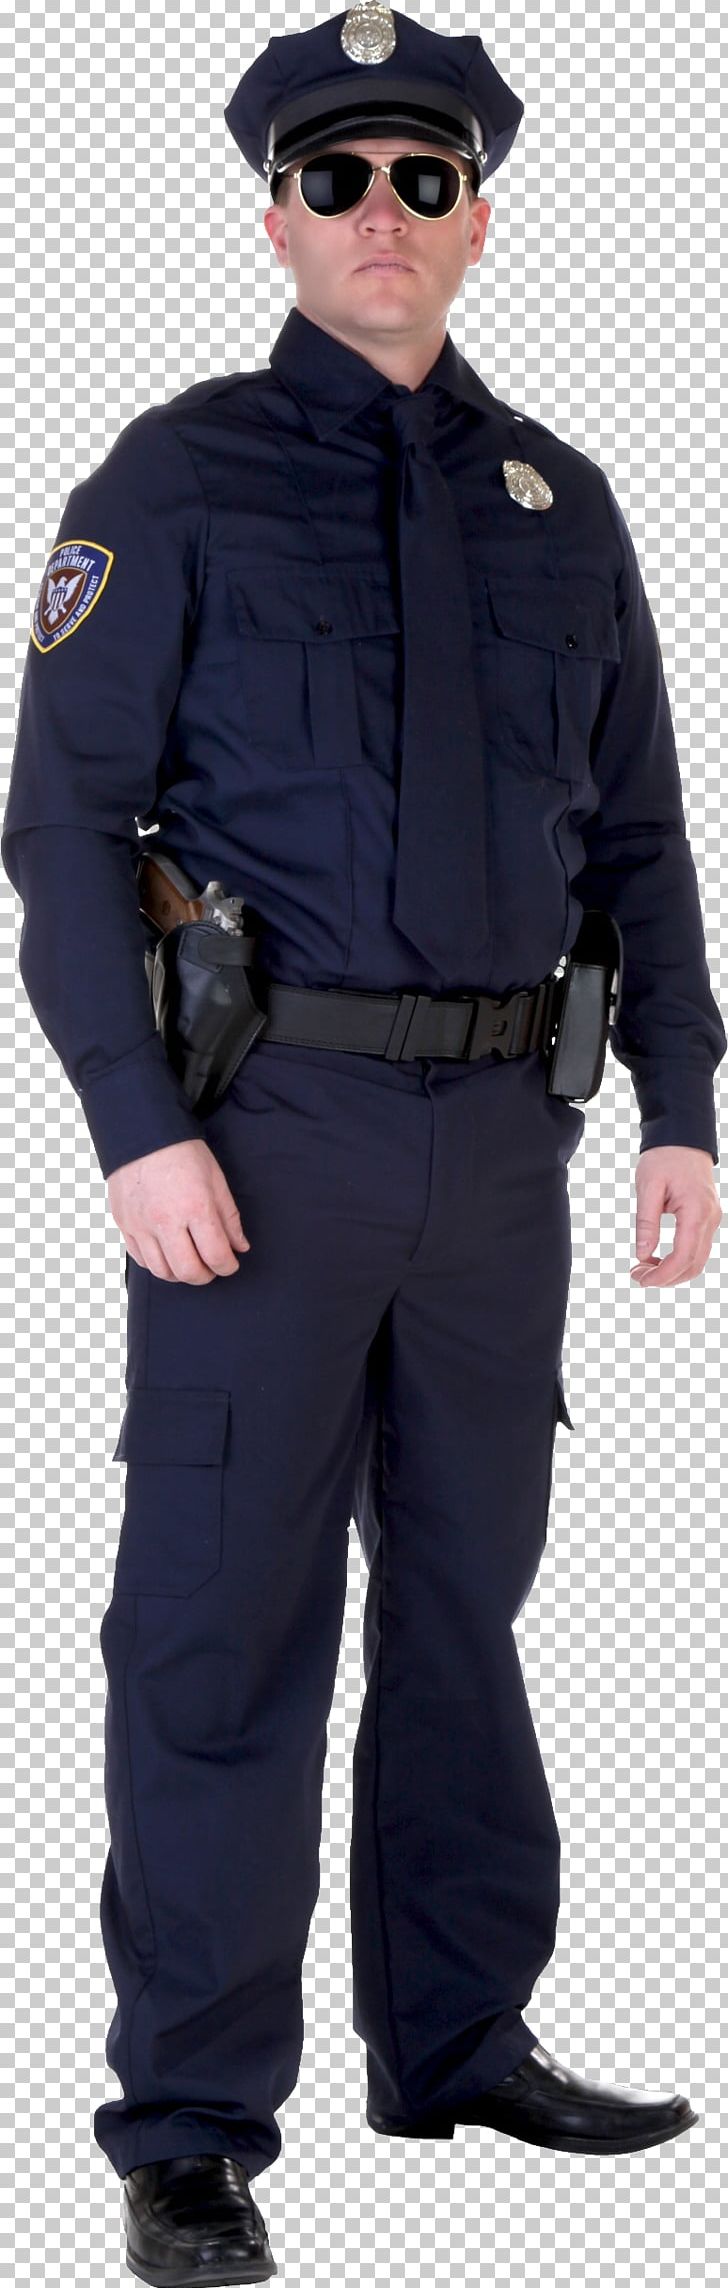 Policeman PNG, Clipart, Policeman Free PNG Download